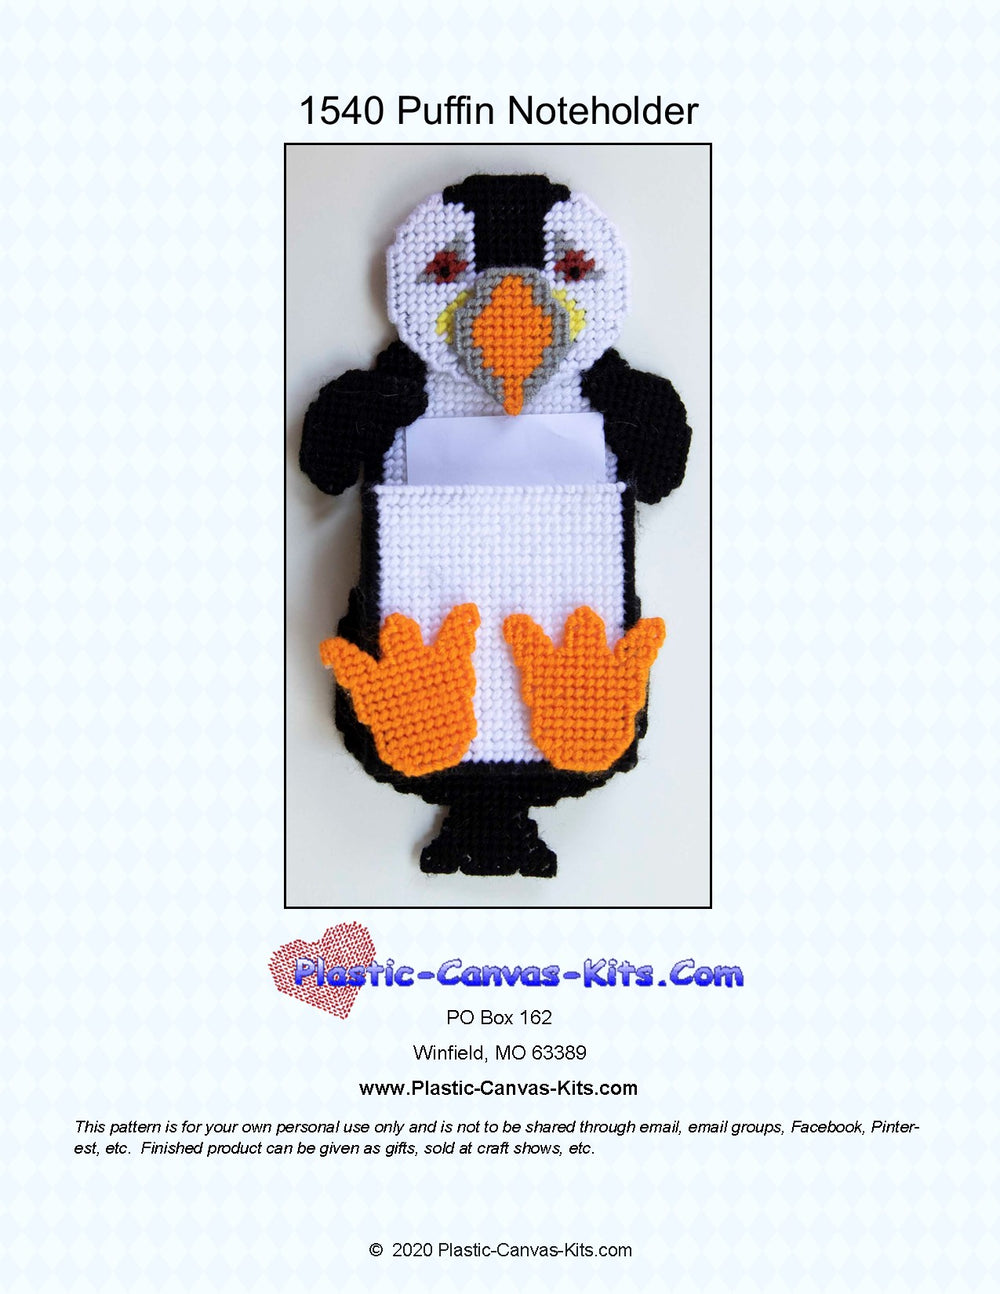 Puffin Note Holder